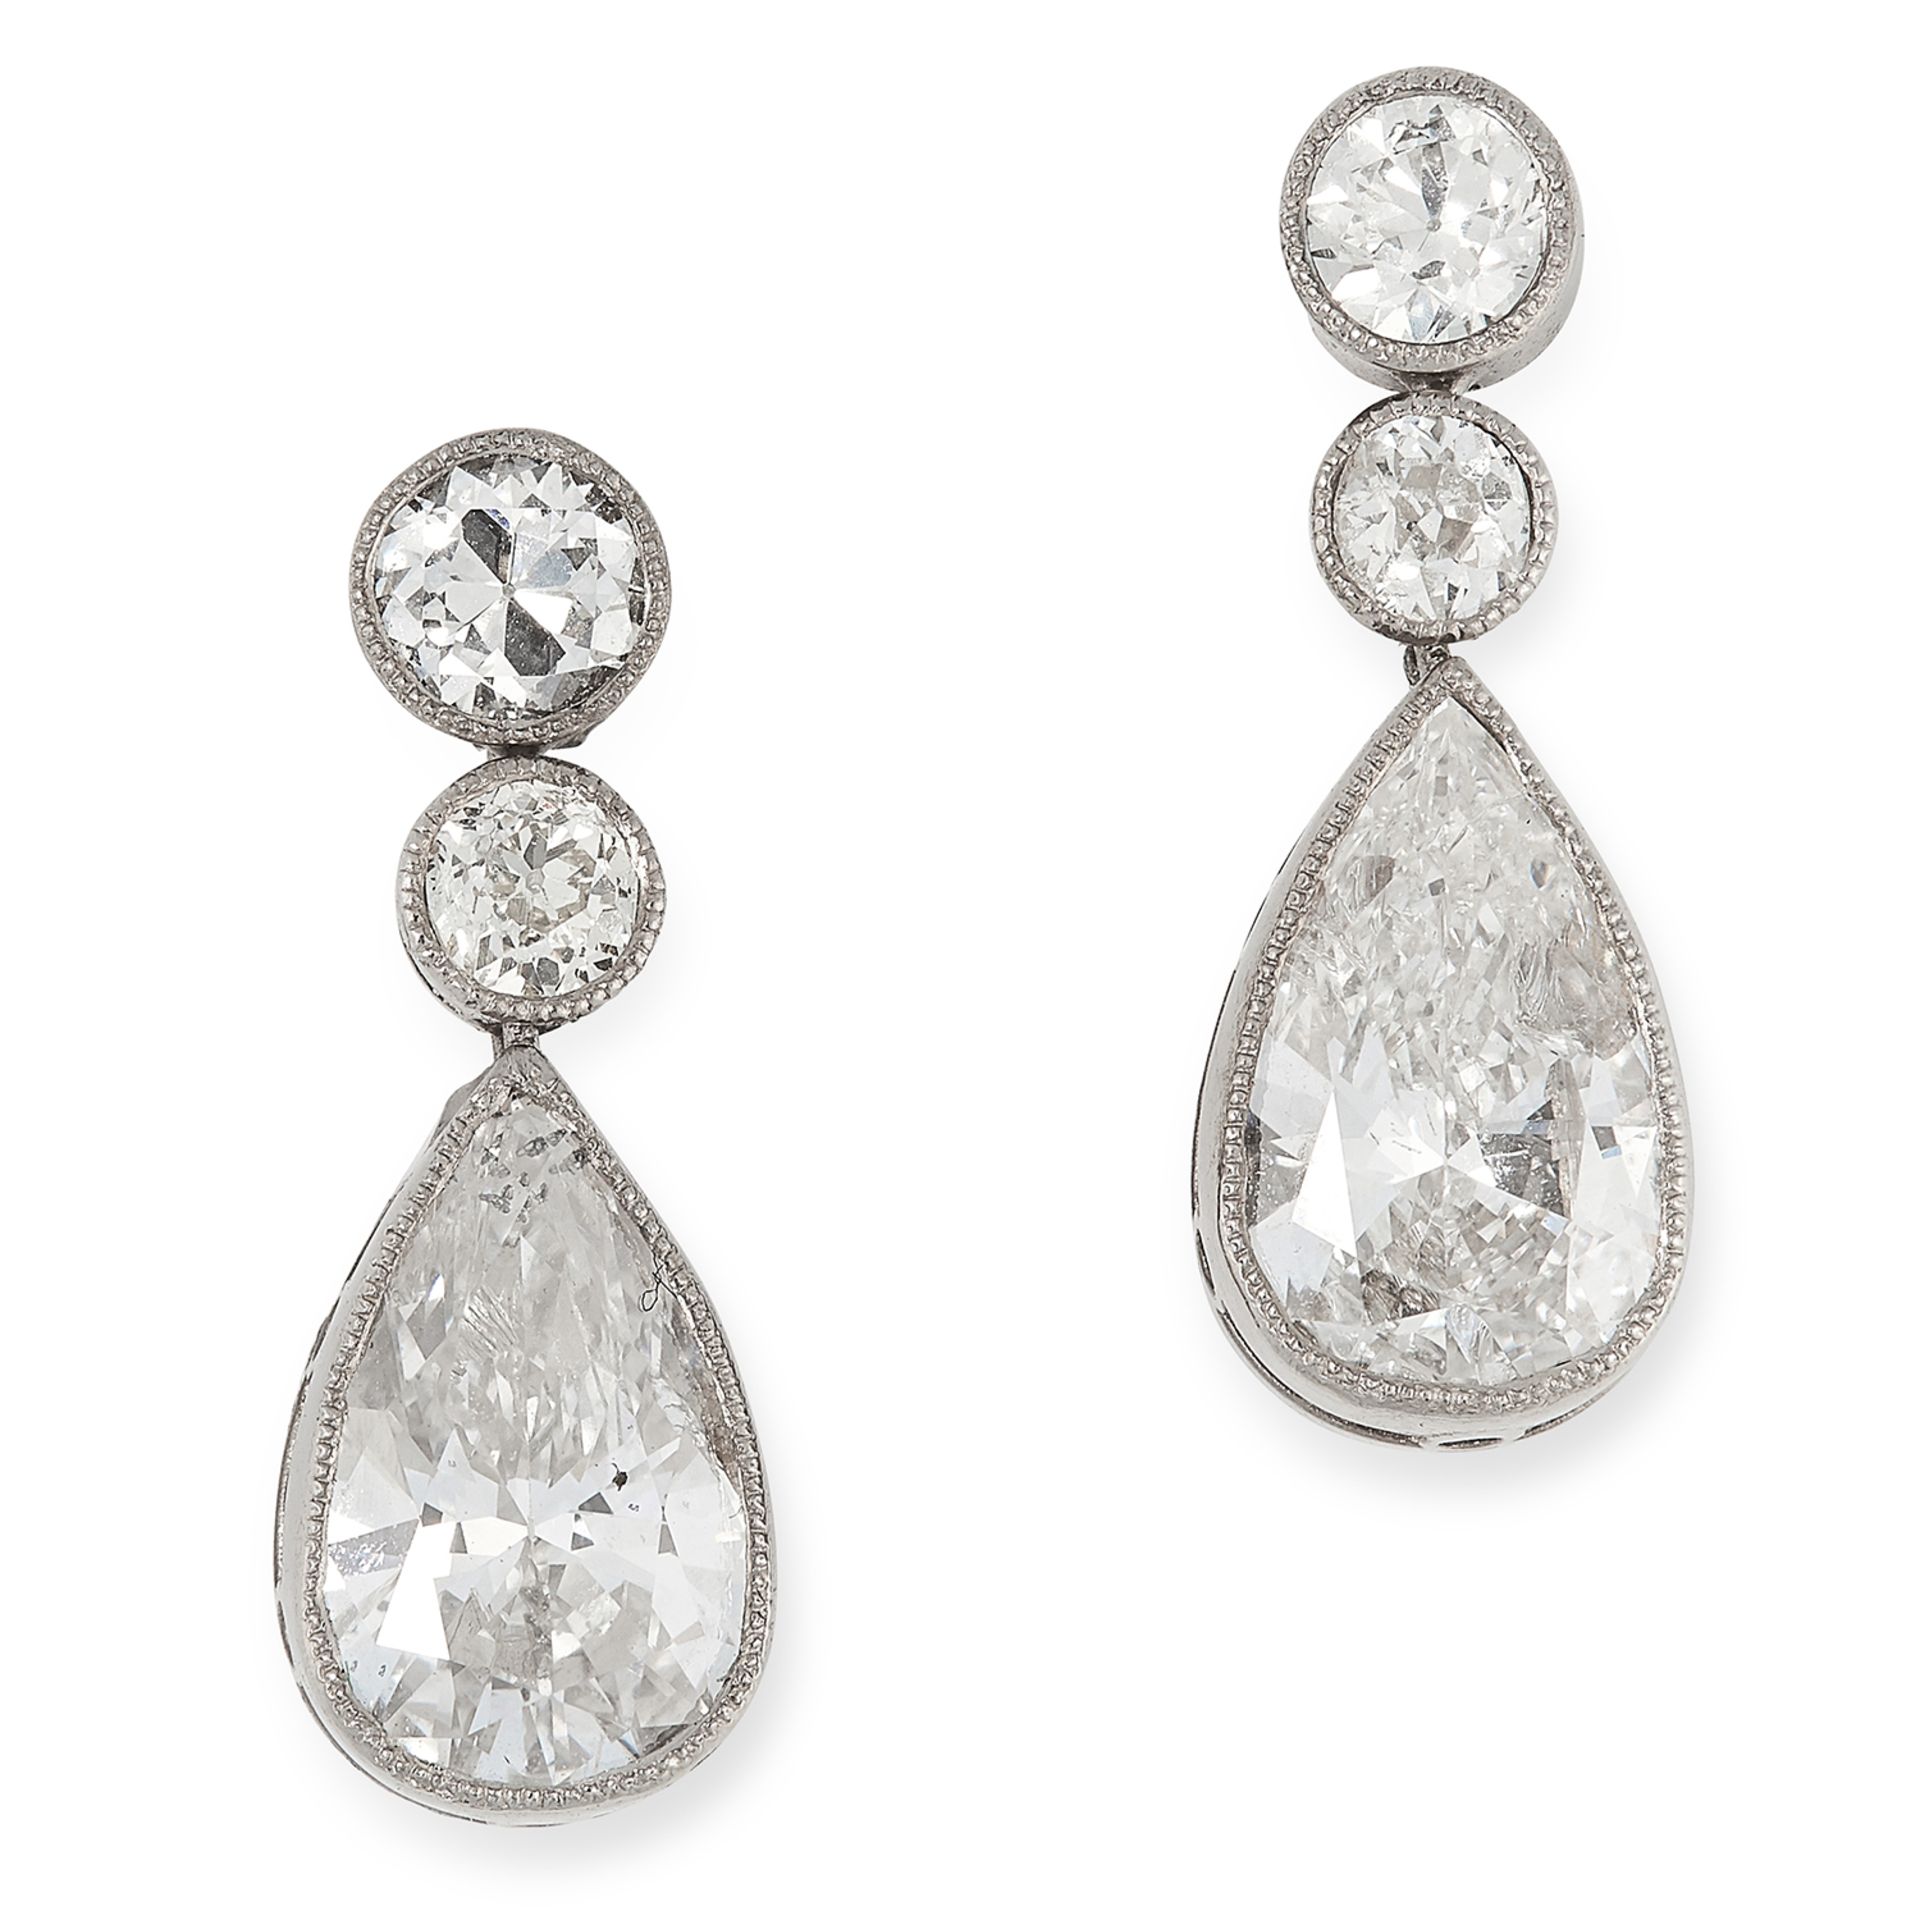 A PAIR OF DIAMOND DROP EARRINGS each set with a principal pear cut diamond of 1.07 and 1.01